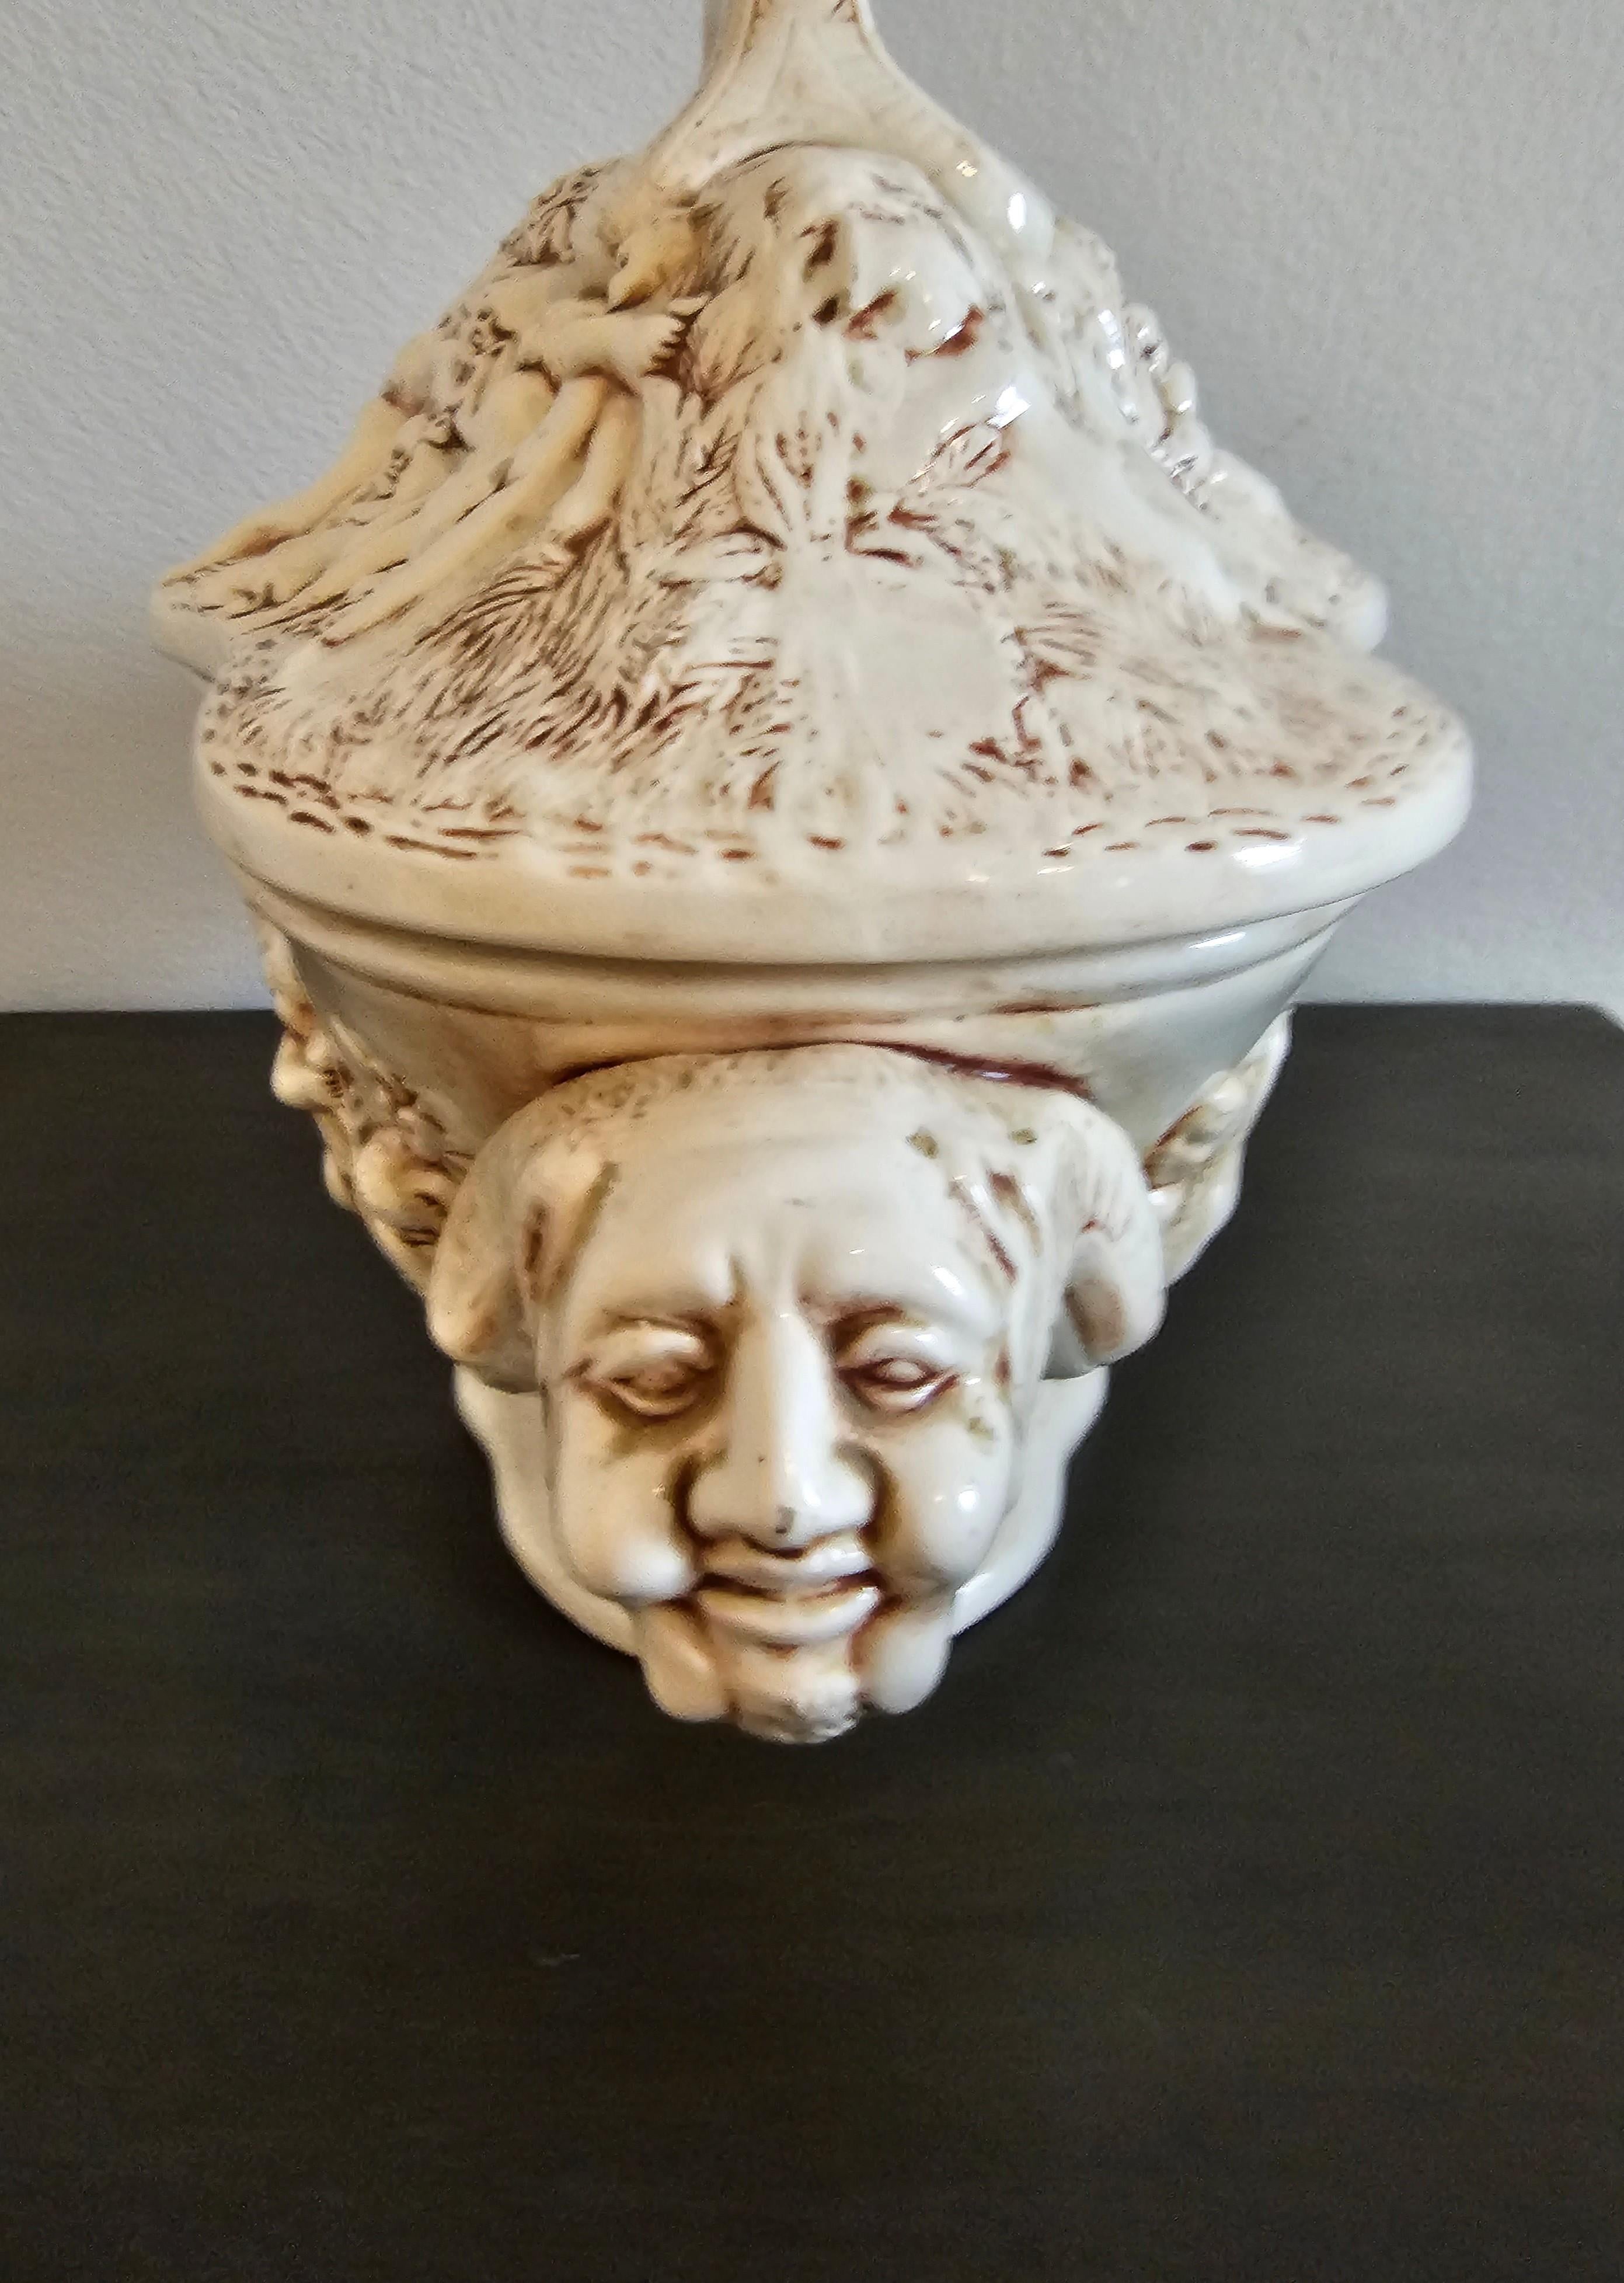 A large and magnificent vintage Italian Renaissance lidded Capodimonte style porcelain serving vessel (makes for a wonderful soup tureen or visually striking table centerpiece). 

The exceptionally executed scalloped shaped handled covered dish